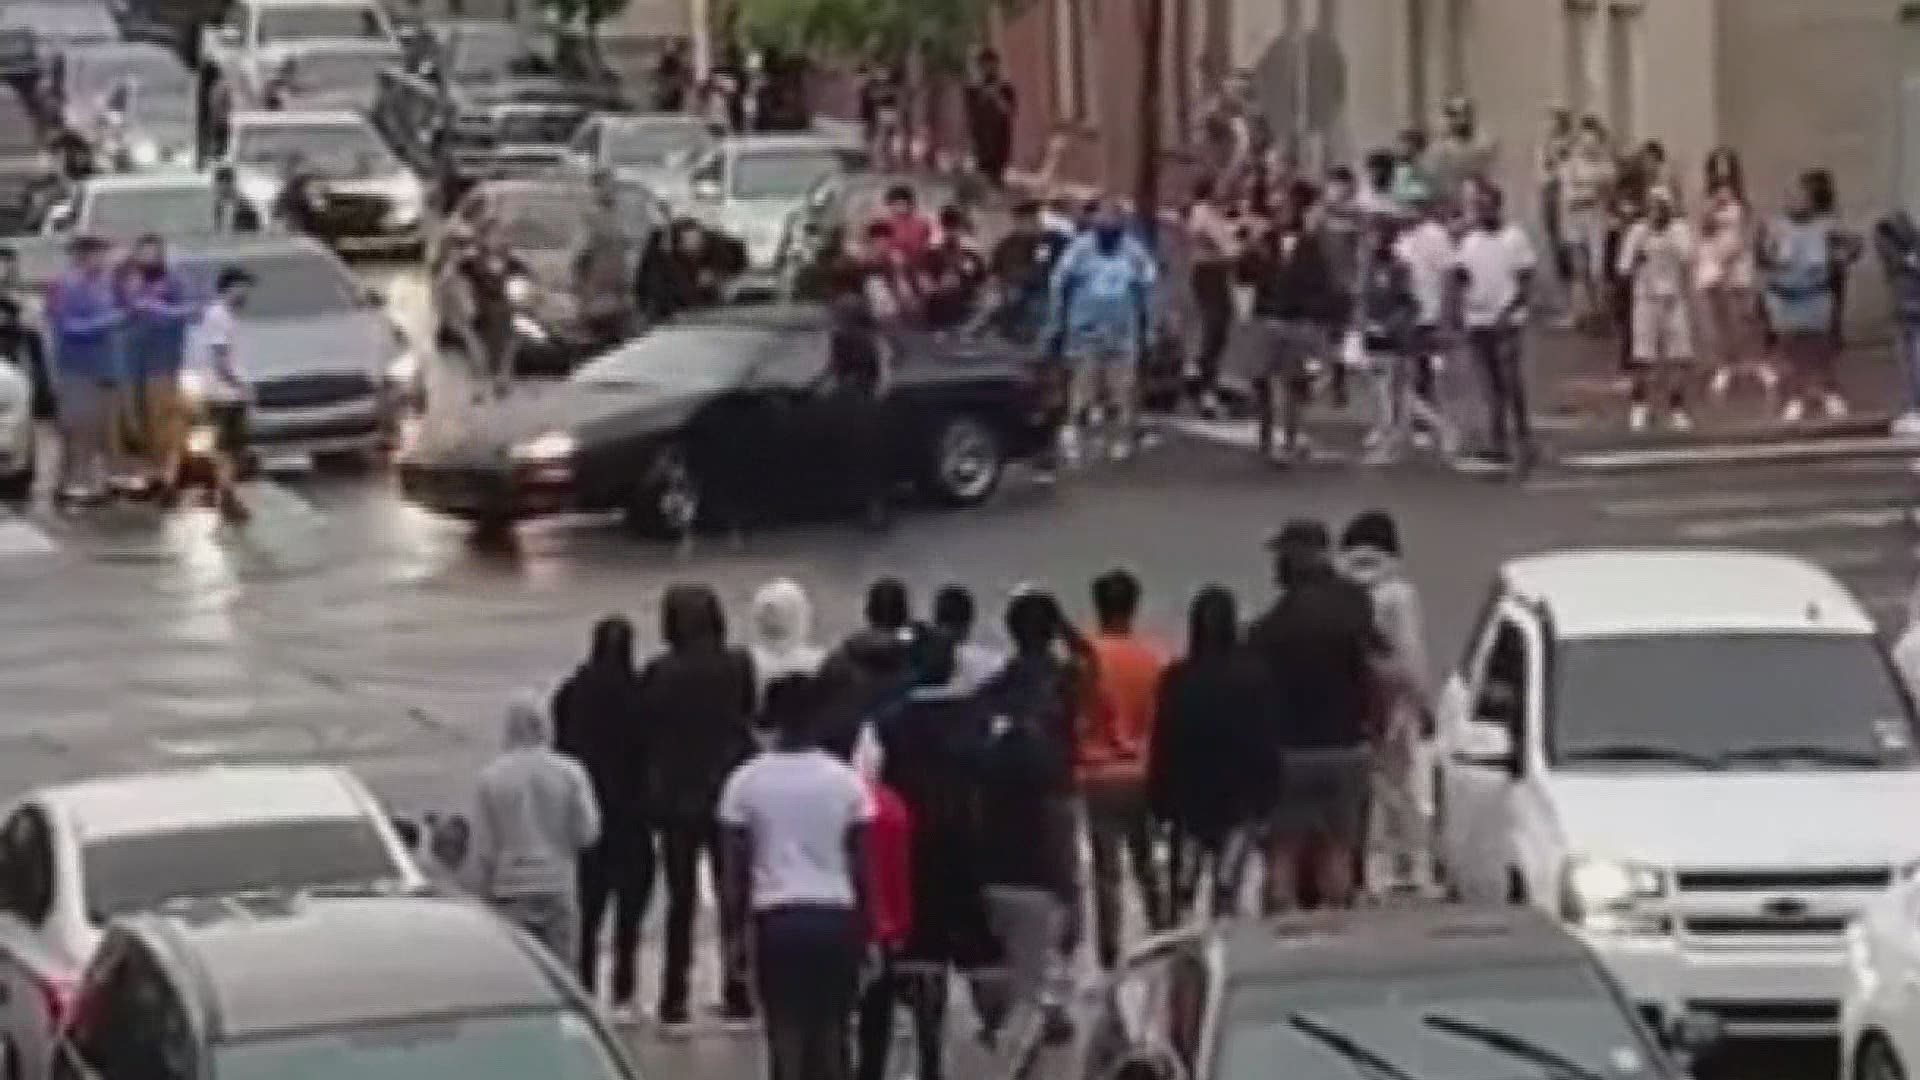 Video shows streets blocked off and cars burning rubber in front of enthusiastic spectators in New Orleans' Warehouse District.